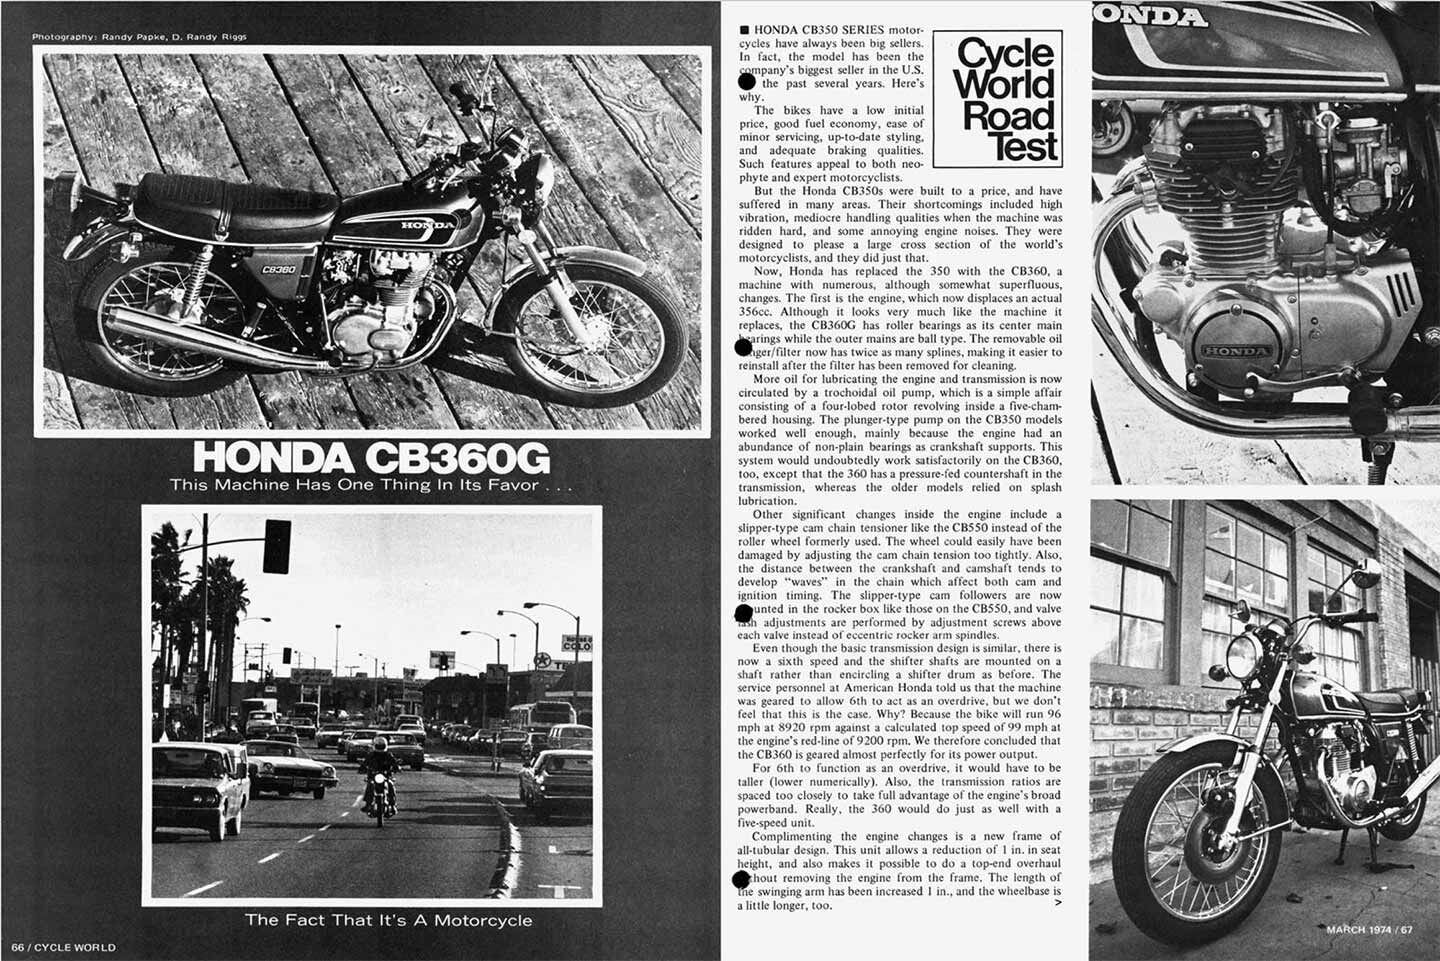 Sister publication <i>Cycle World</i> was underwhelmed by the CB360 in 1974.